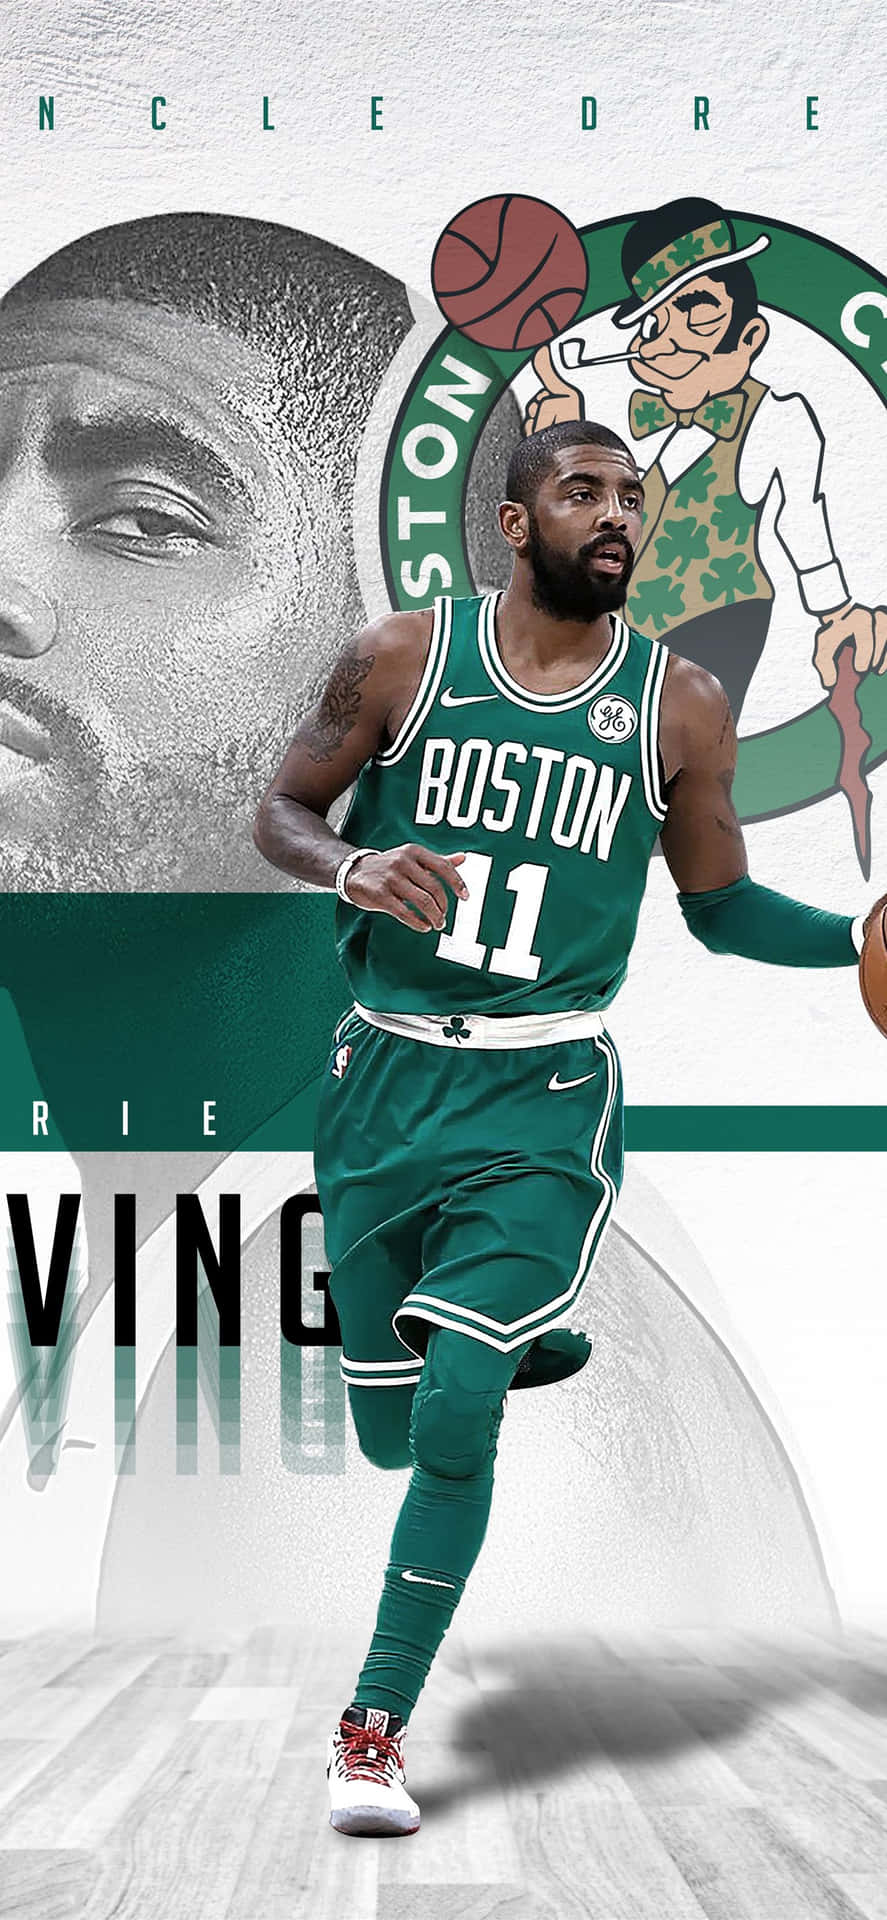 Kyrie Irving's flagship iPhone Wallpaper